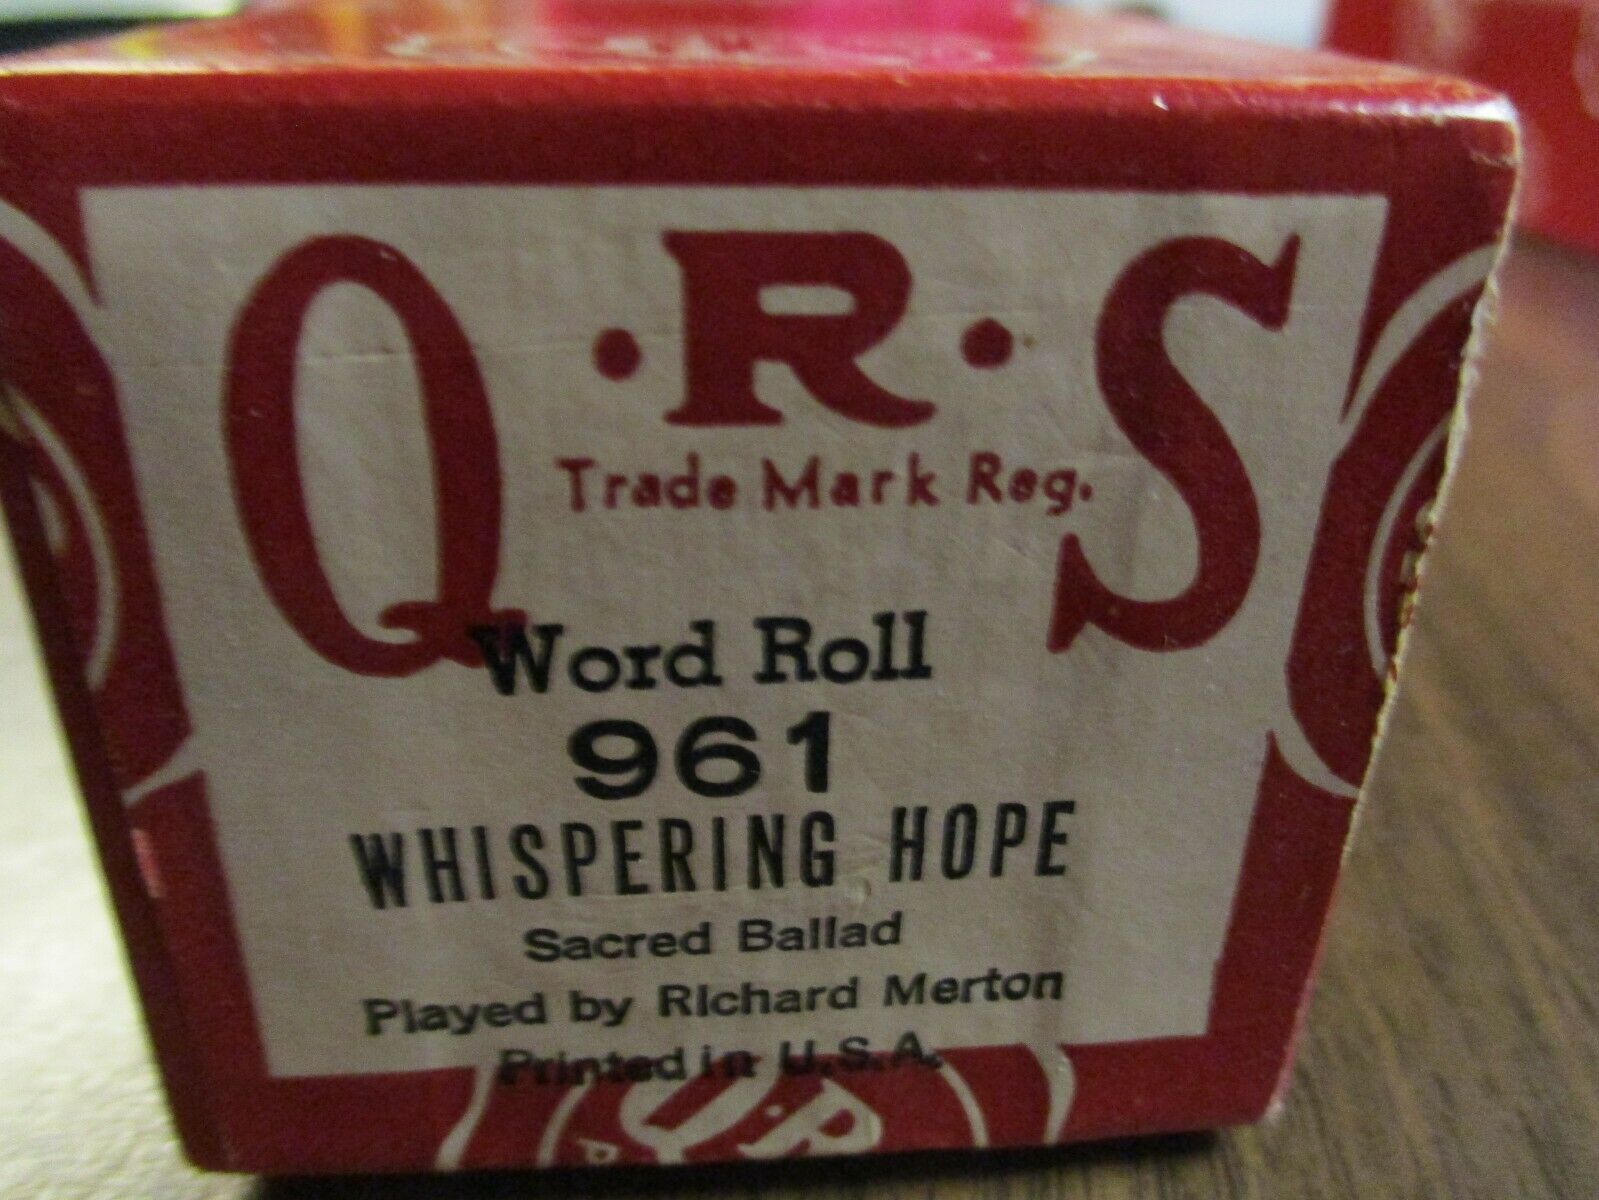 Qrs Piano Roll Whispering Hope #961